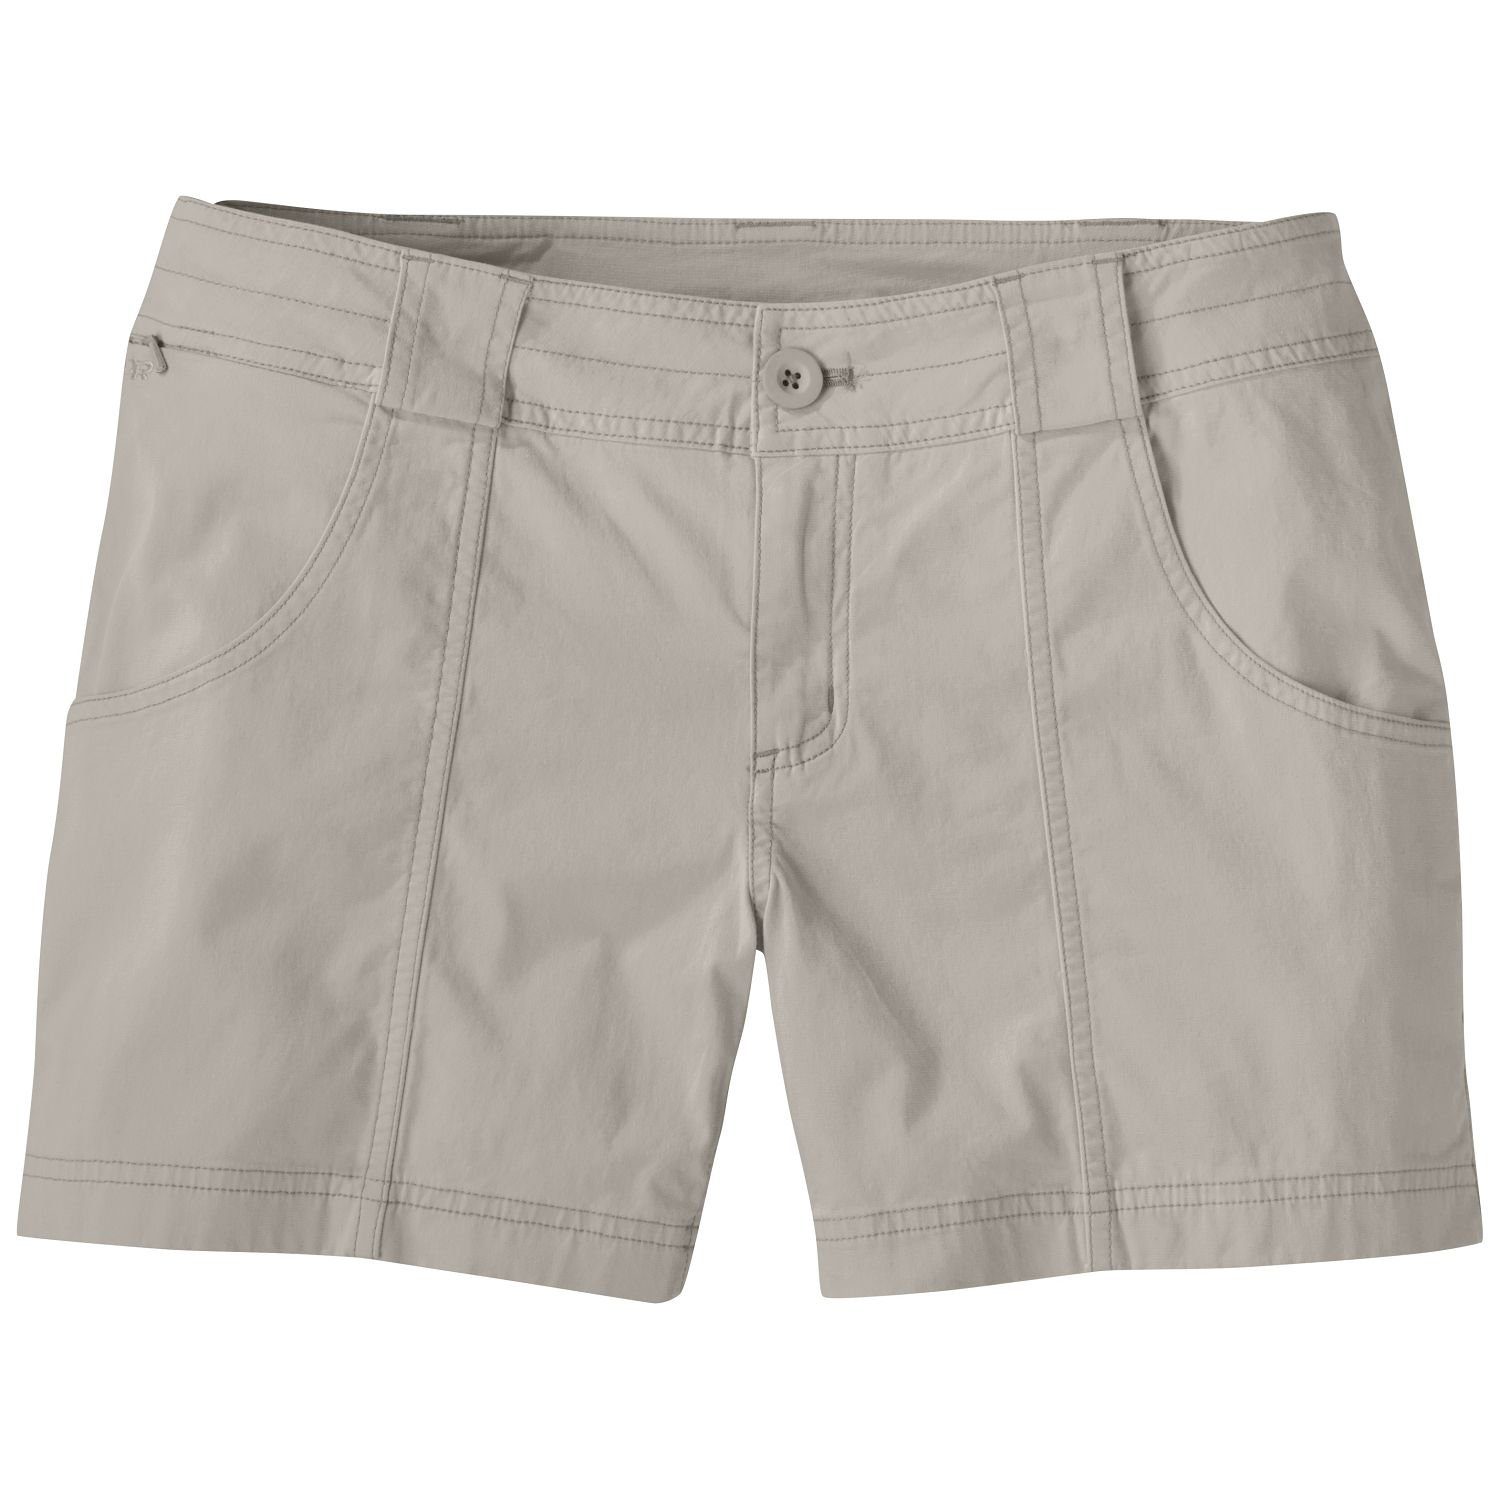 Wadi Outdoor Laufhose Research (1-tlg) Outdoor Shorts Rum Hose weiß Research Women's